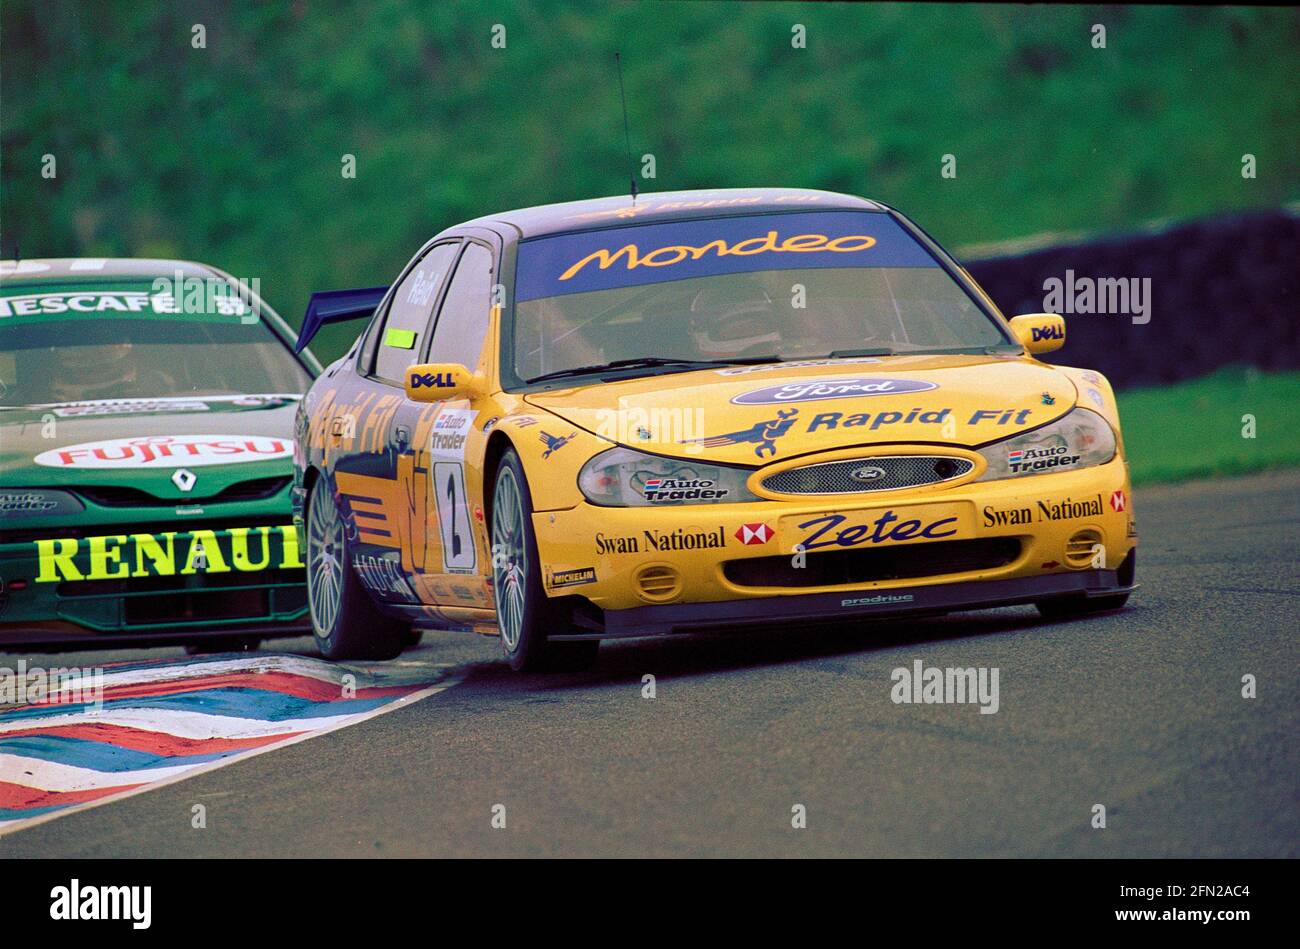 Anthony Reid in his Ford Mondeo in the 1999 BTCC championship rounds 5 and 6 at Thruxton Motor circuit England. Stock Photo